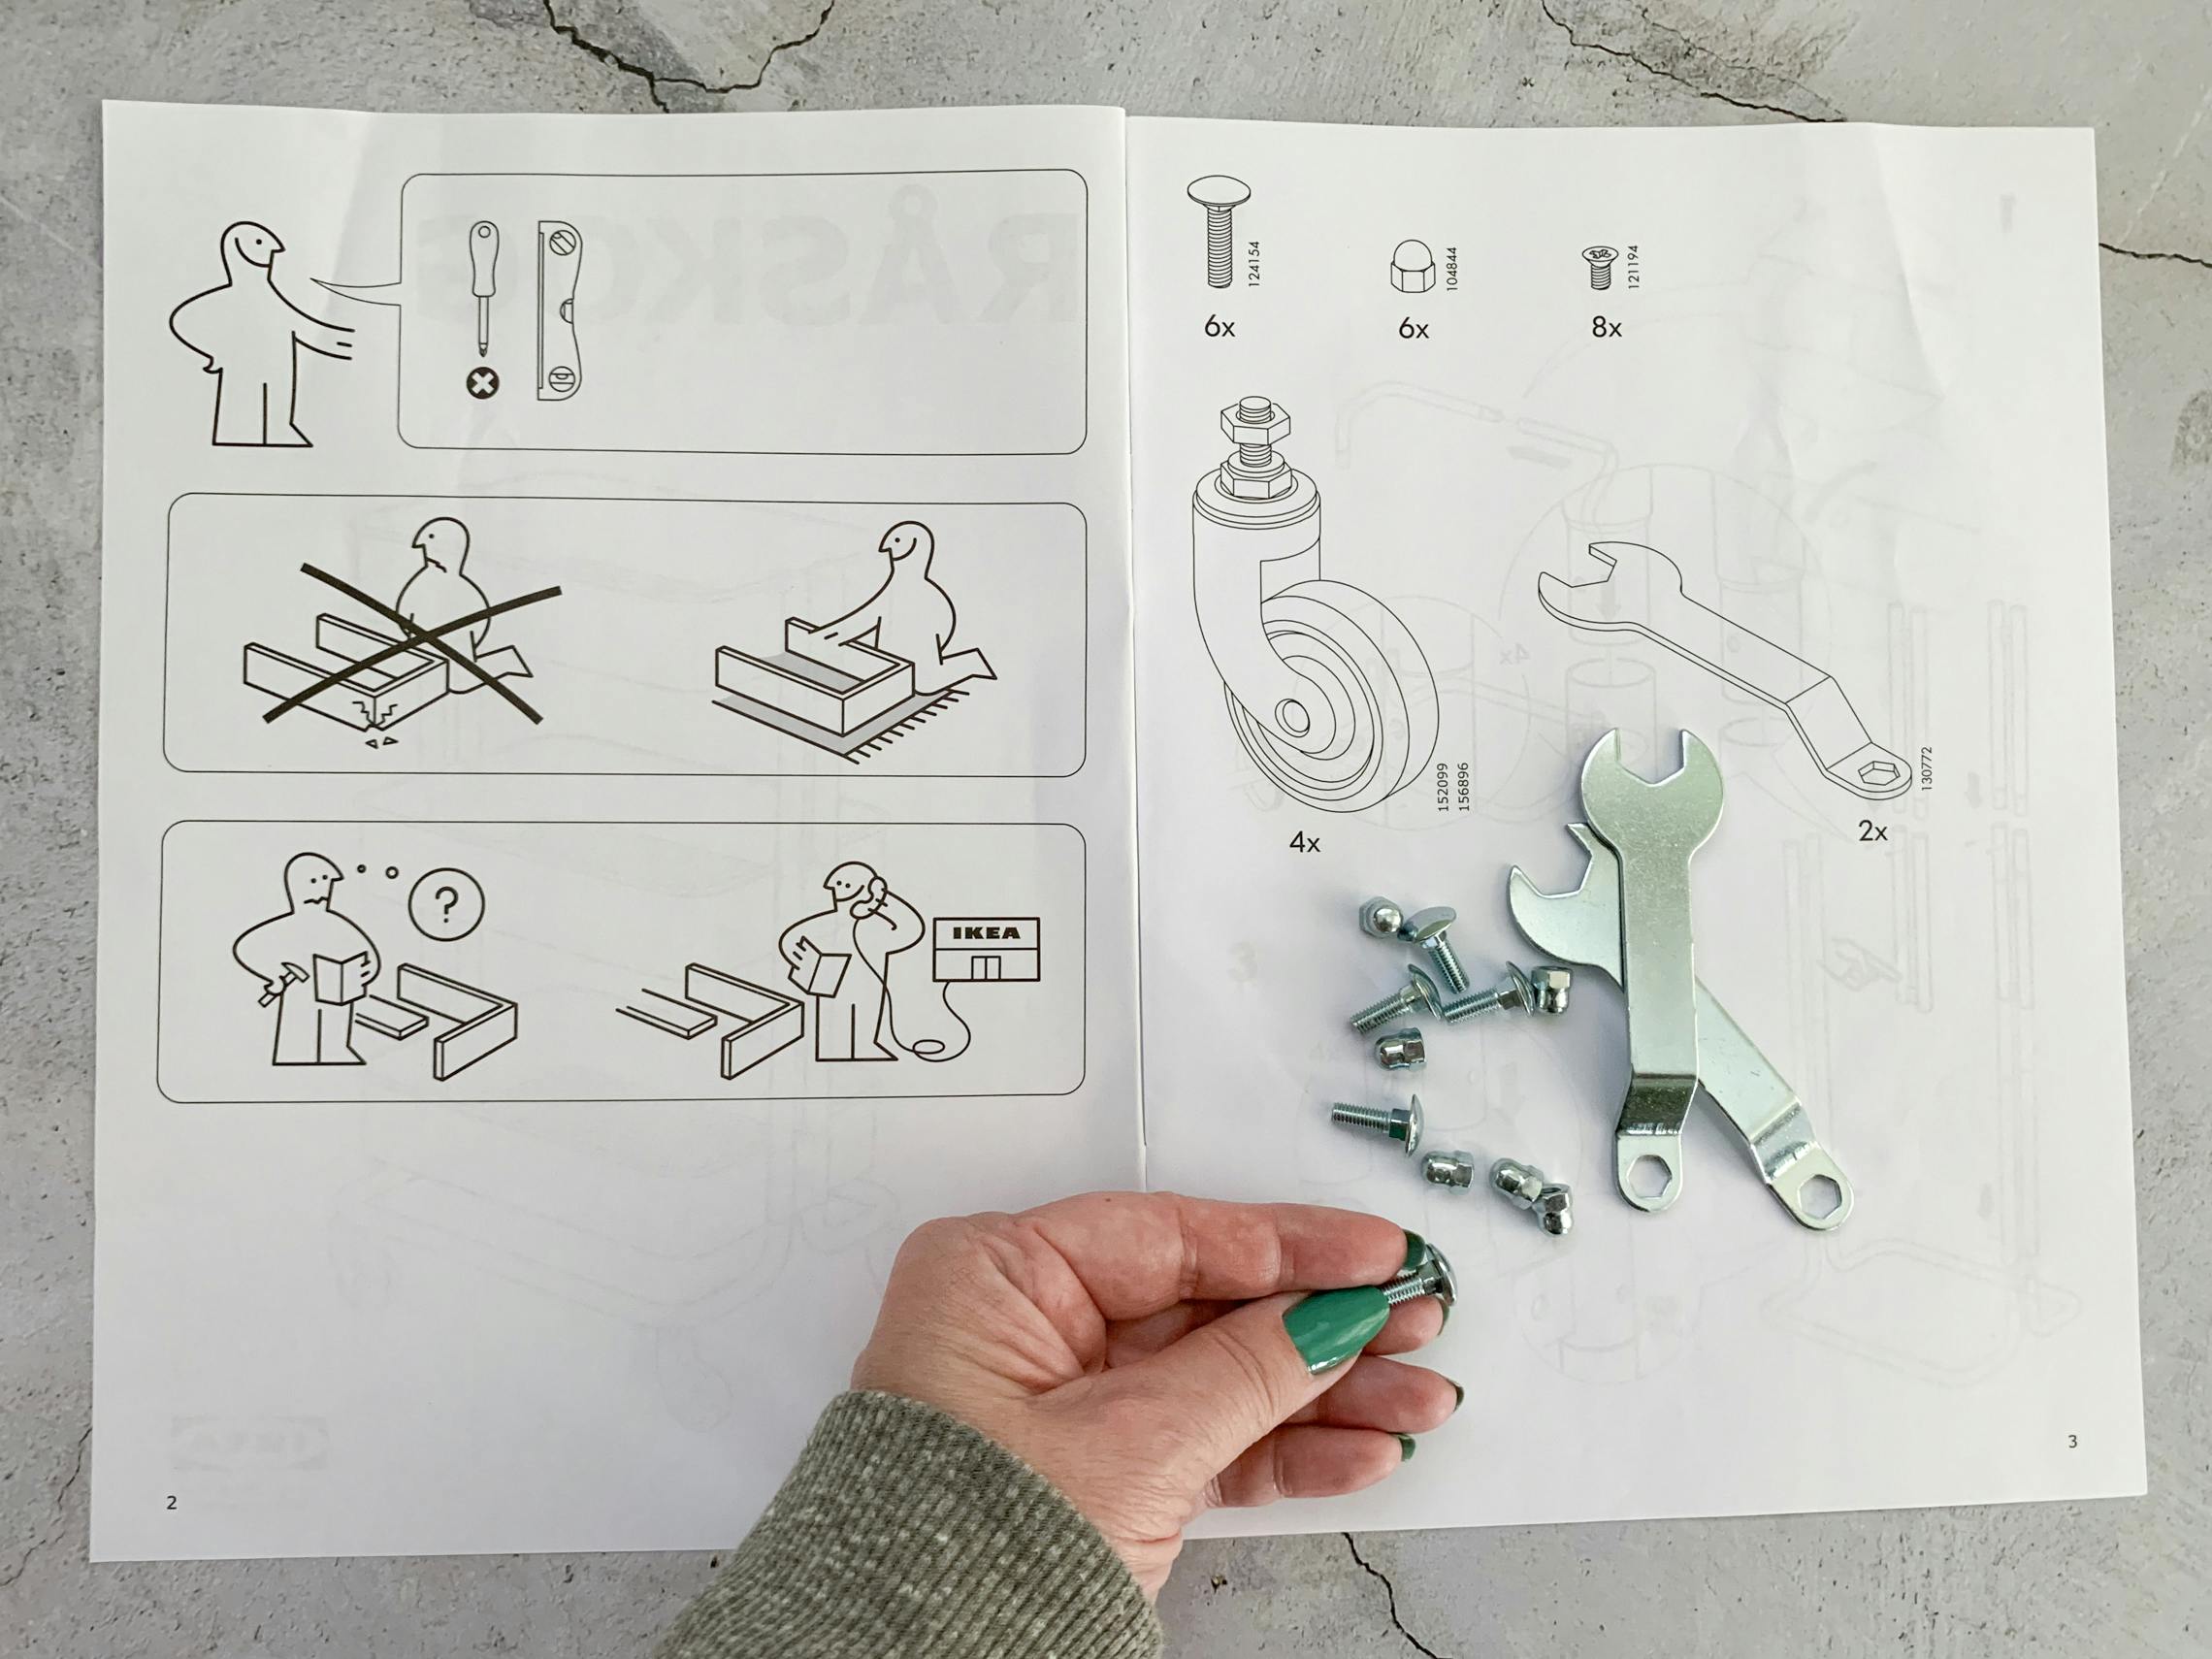 Ikea manual and parts for furniture